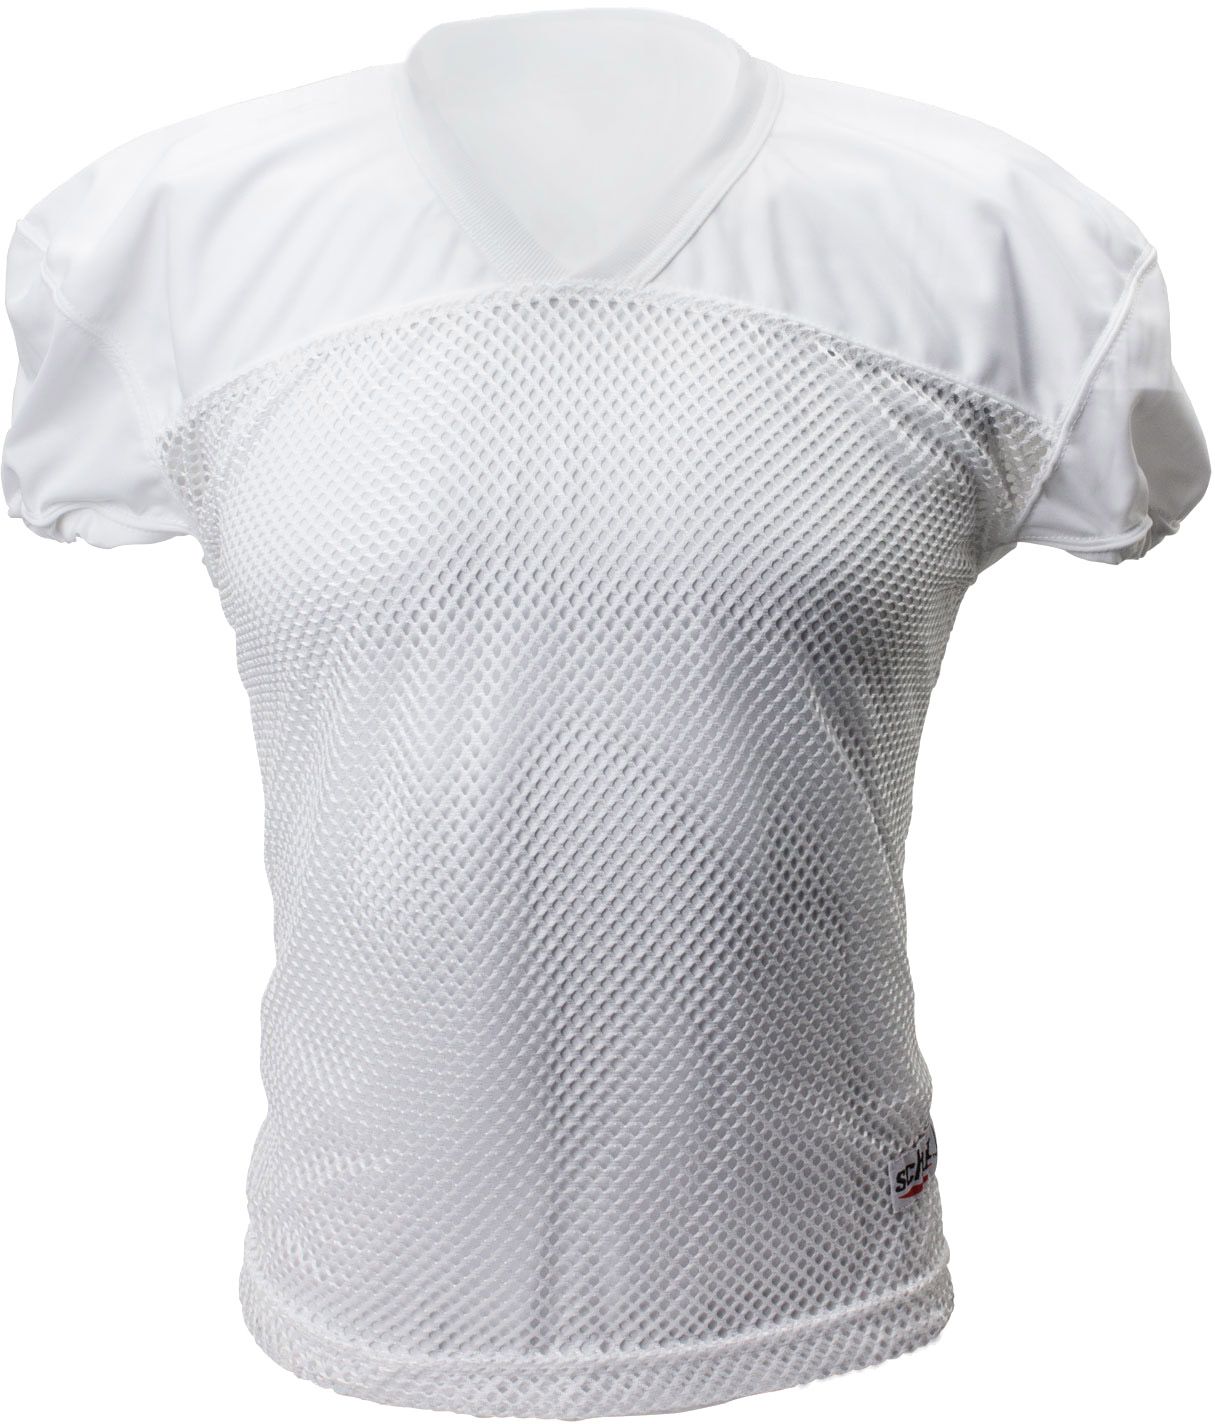 nike youth football practice jersey